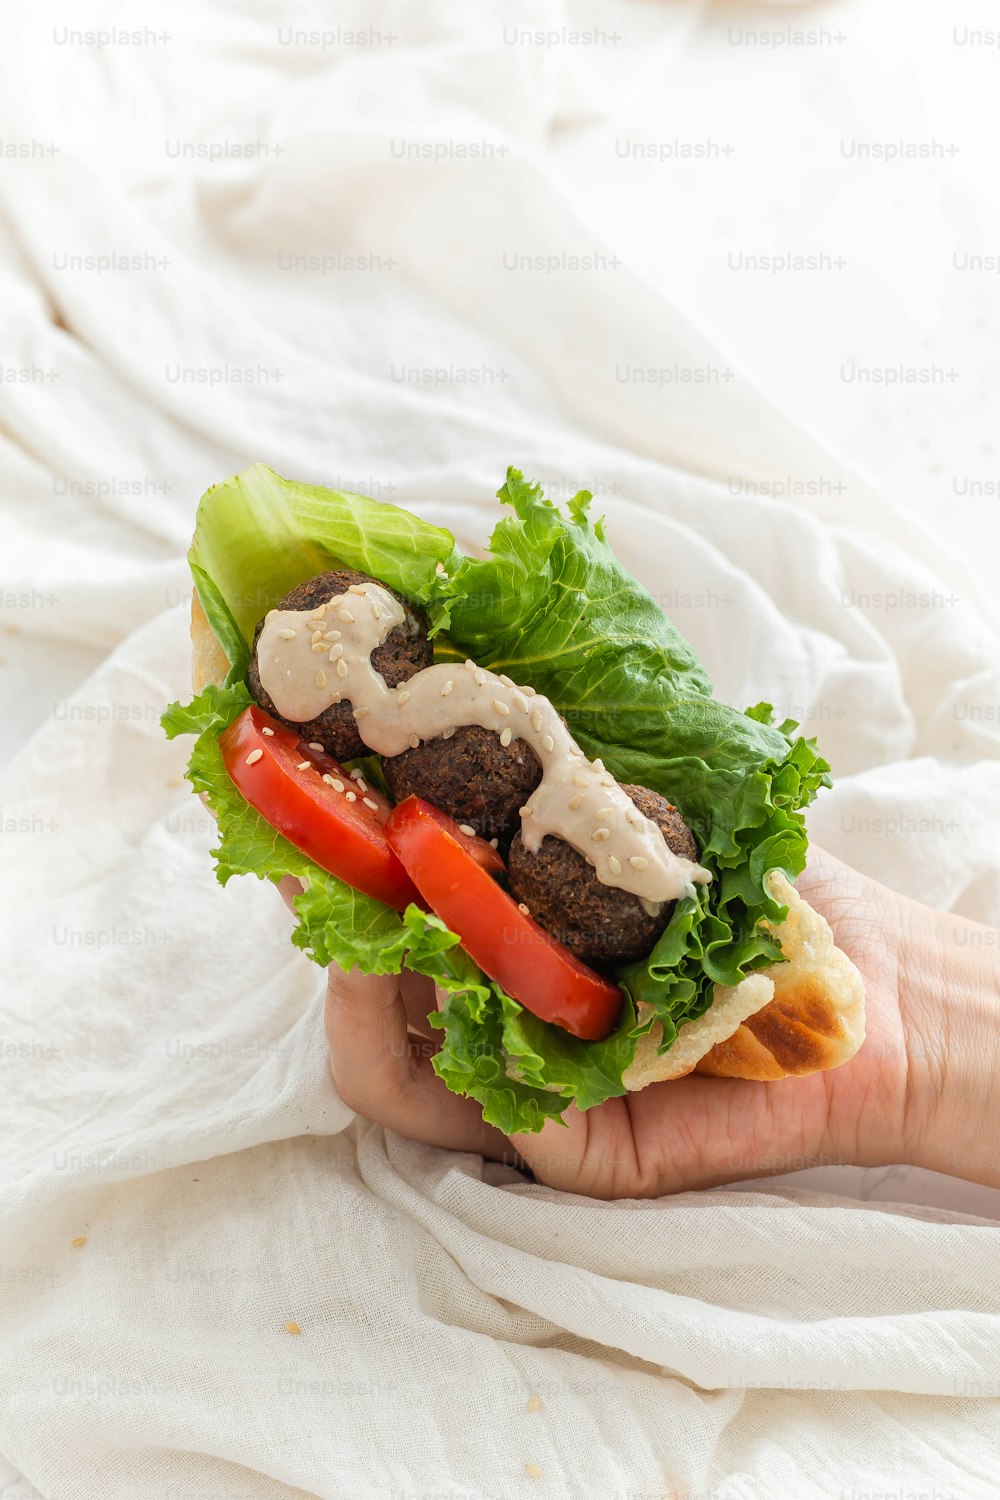 a hand holding a sandwich with lettuce and tomatoes